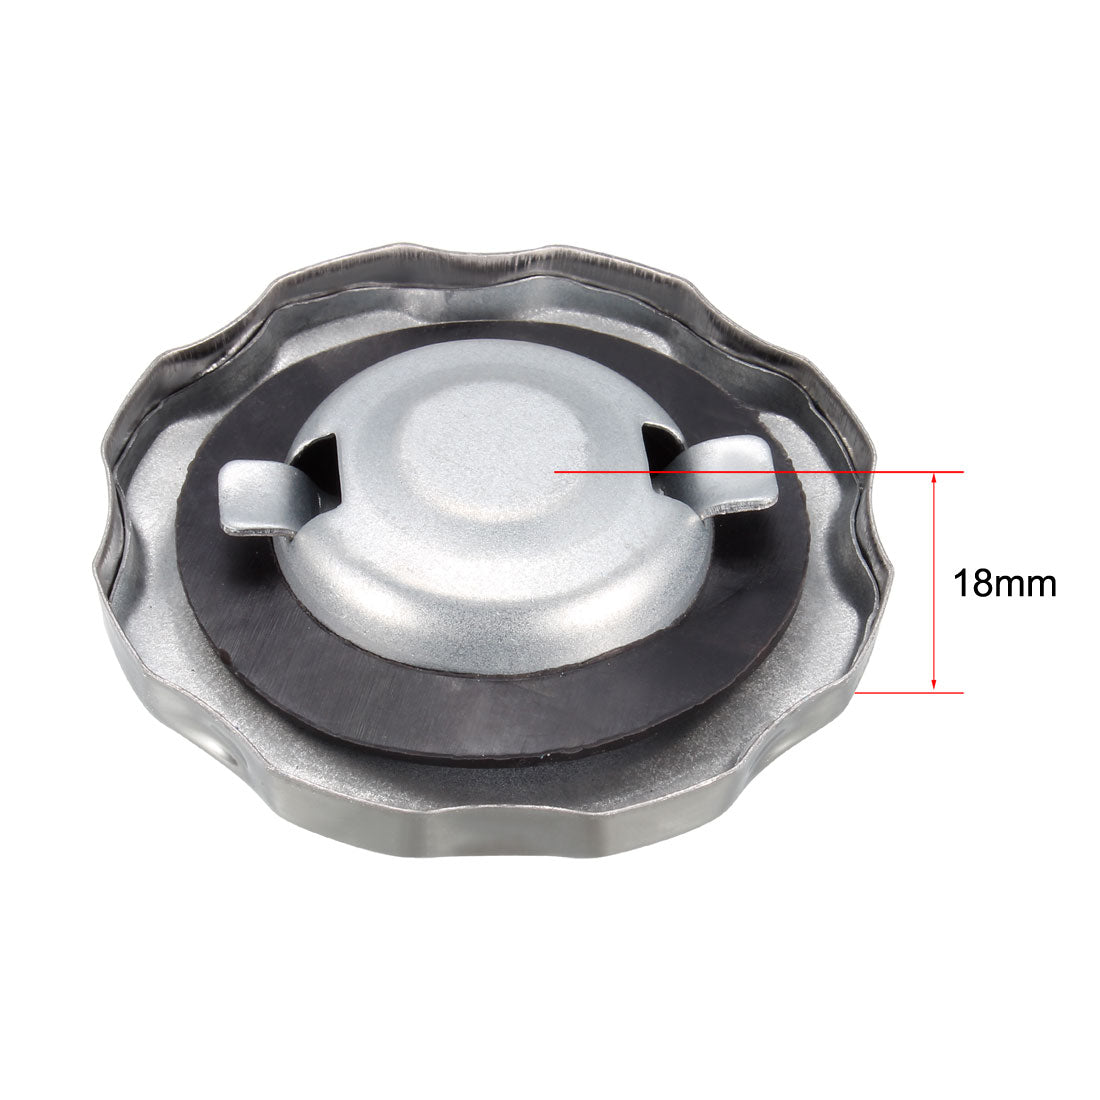 uxcell Uxcell Fuel Tank Gas Cap for GX200 for GX240 for GX270 for GX390 for 168F for 190F 2Pcs